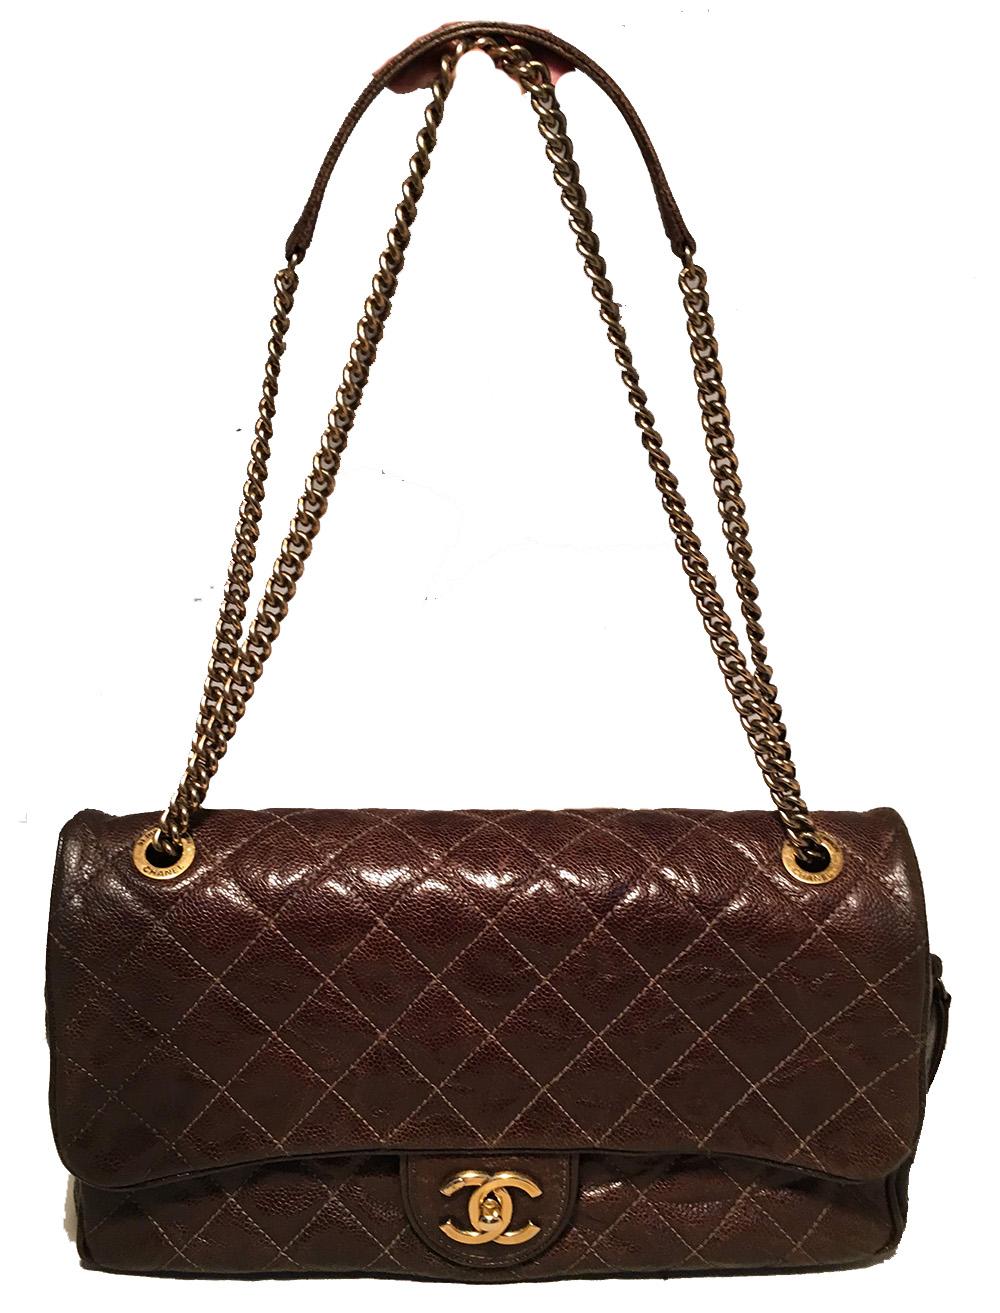 Chanel Brown Distressed Caviar Leather Quilted Classic Flap Shoulder Bag in excellent condition. Brown quilted distressed caviar leather exterior trimmed with antiqued gold hardware. Front CC logo twist closure opens via single flap and top zipper